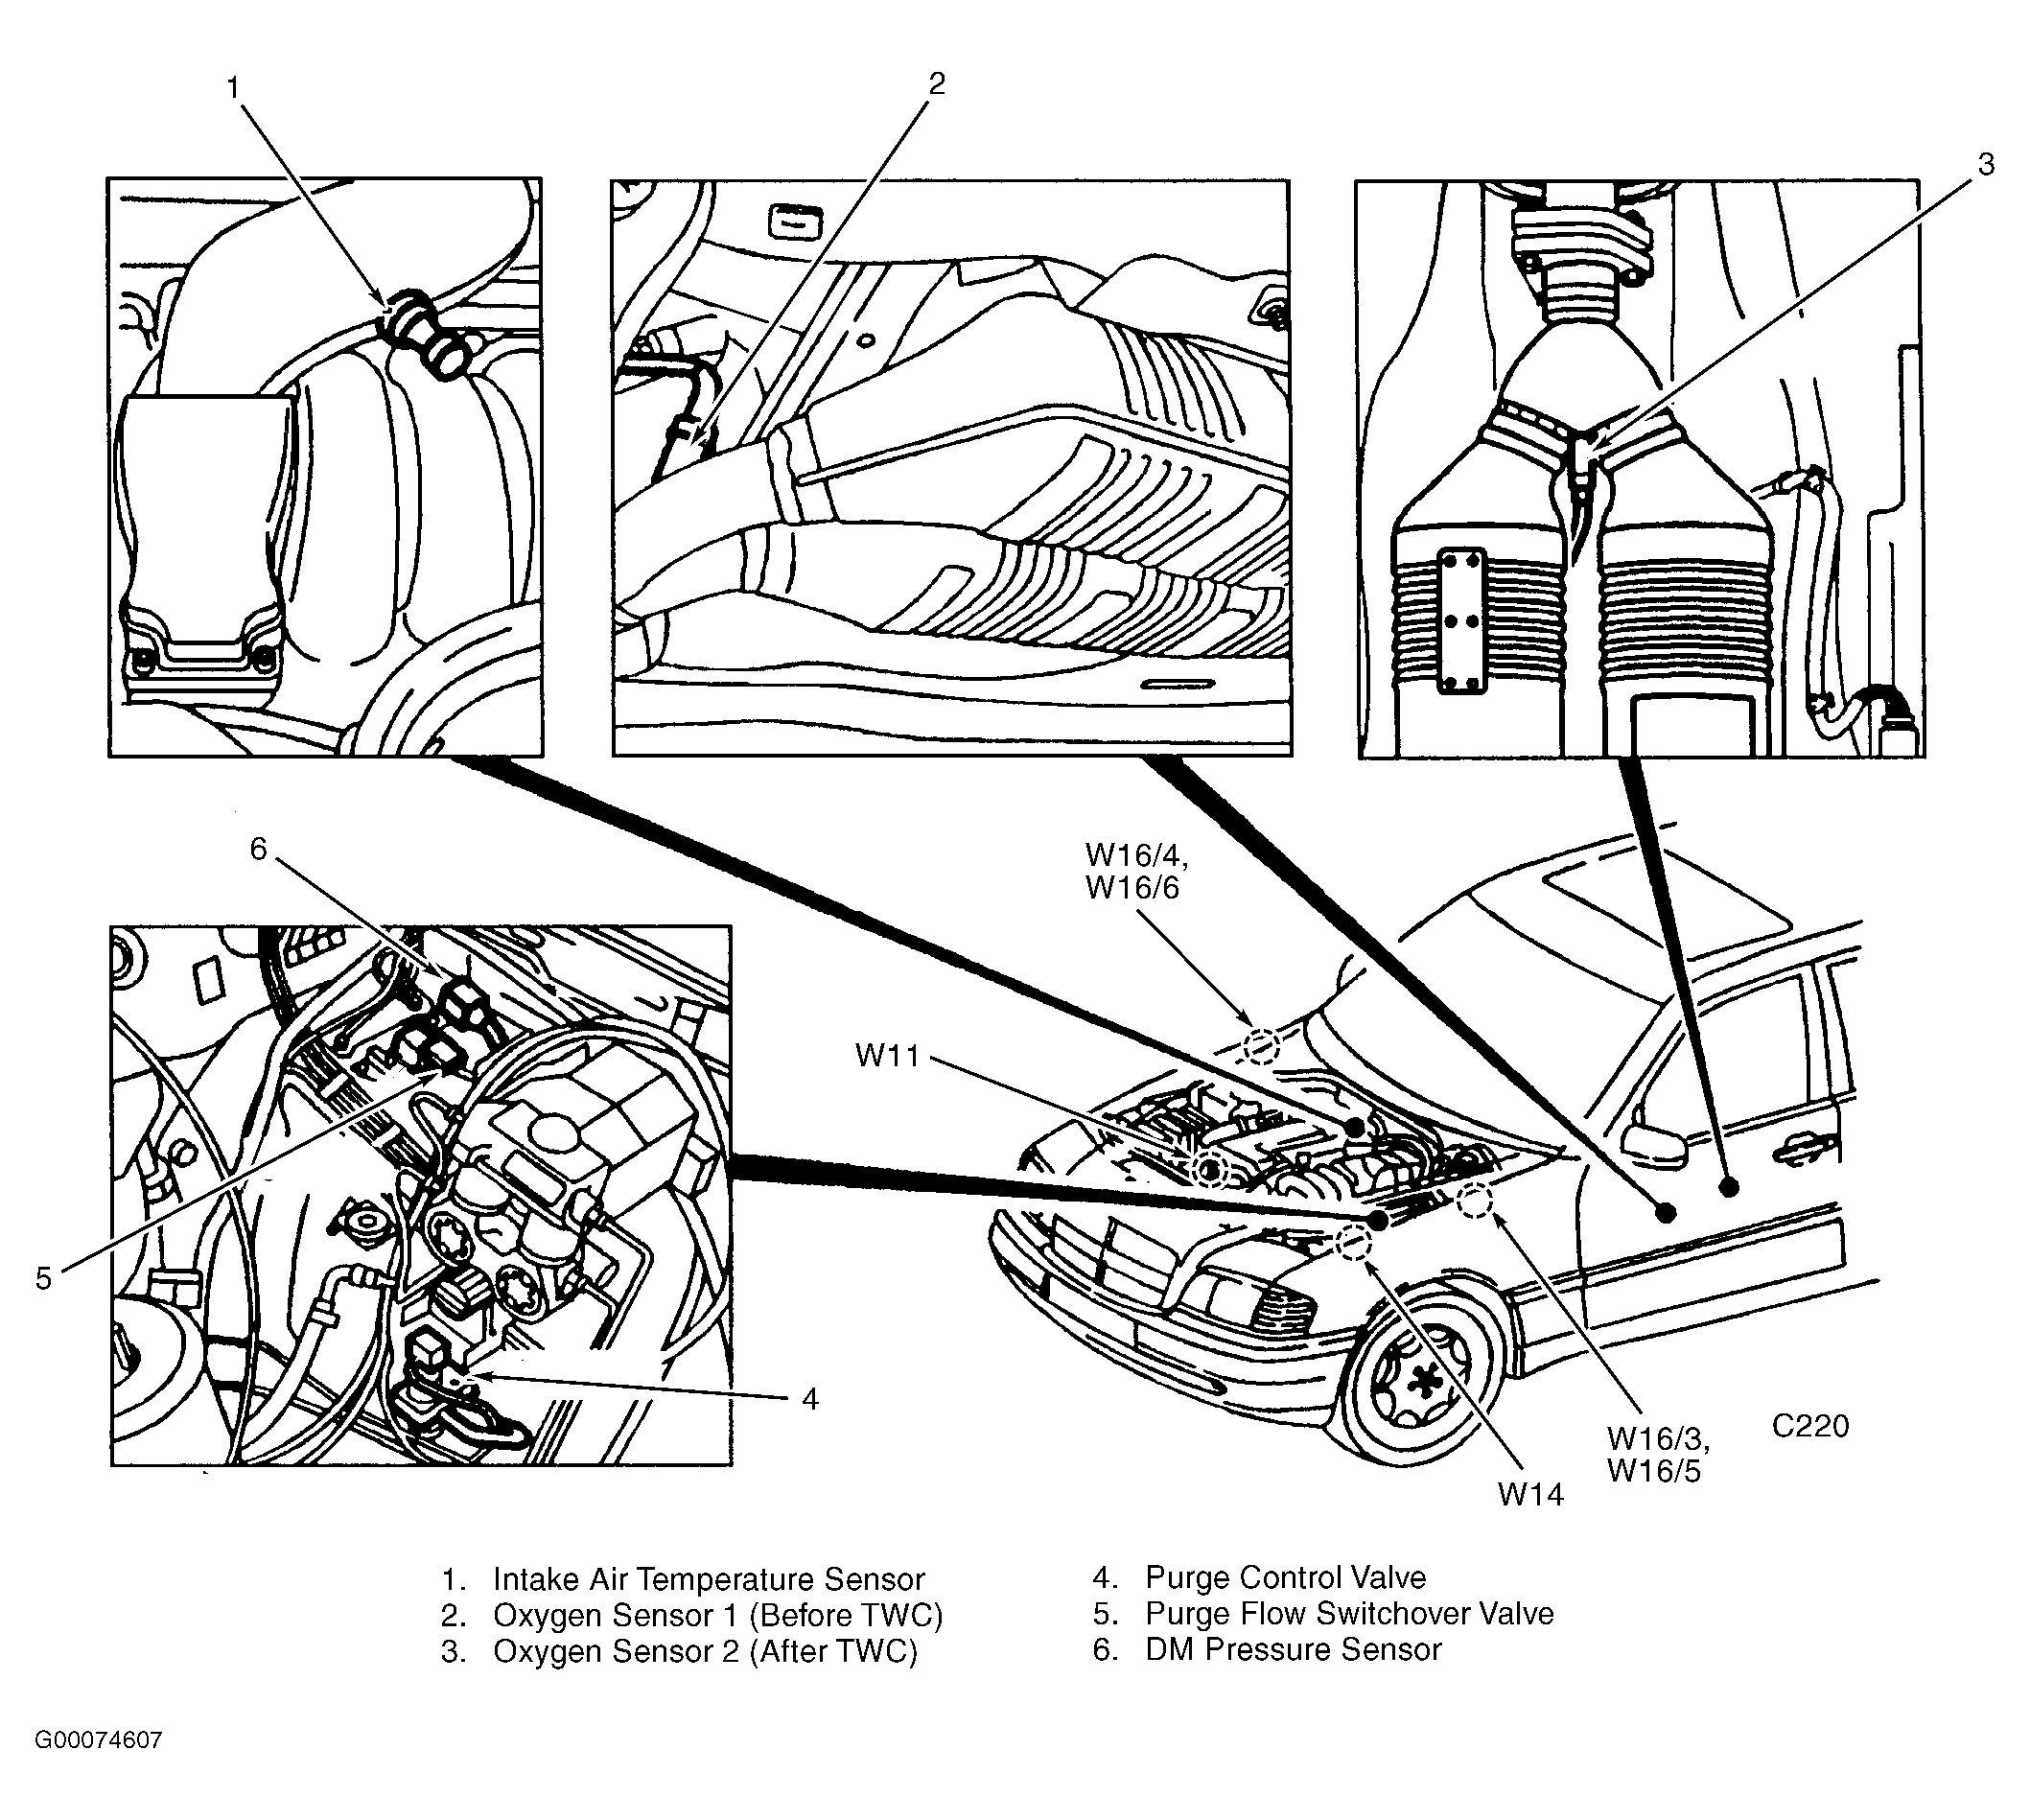 Mercedes-Benz C280 1995 - Component Locations -  Front Of Vehicle (C220)